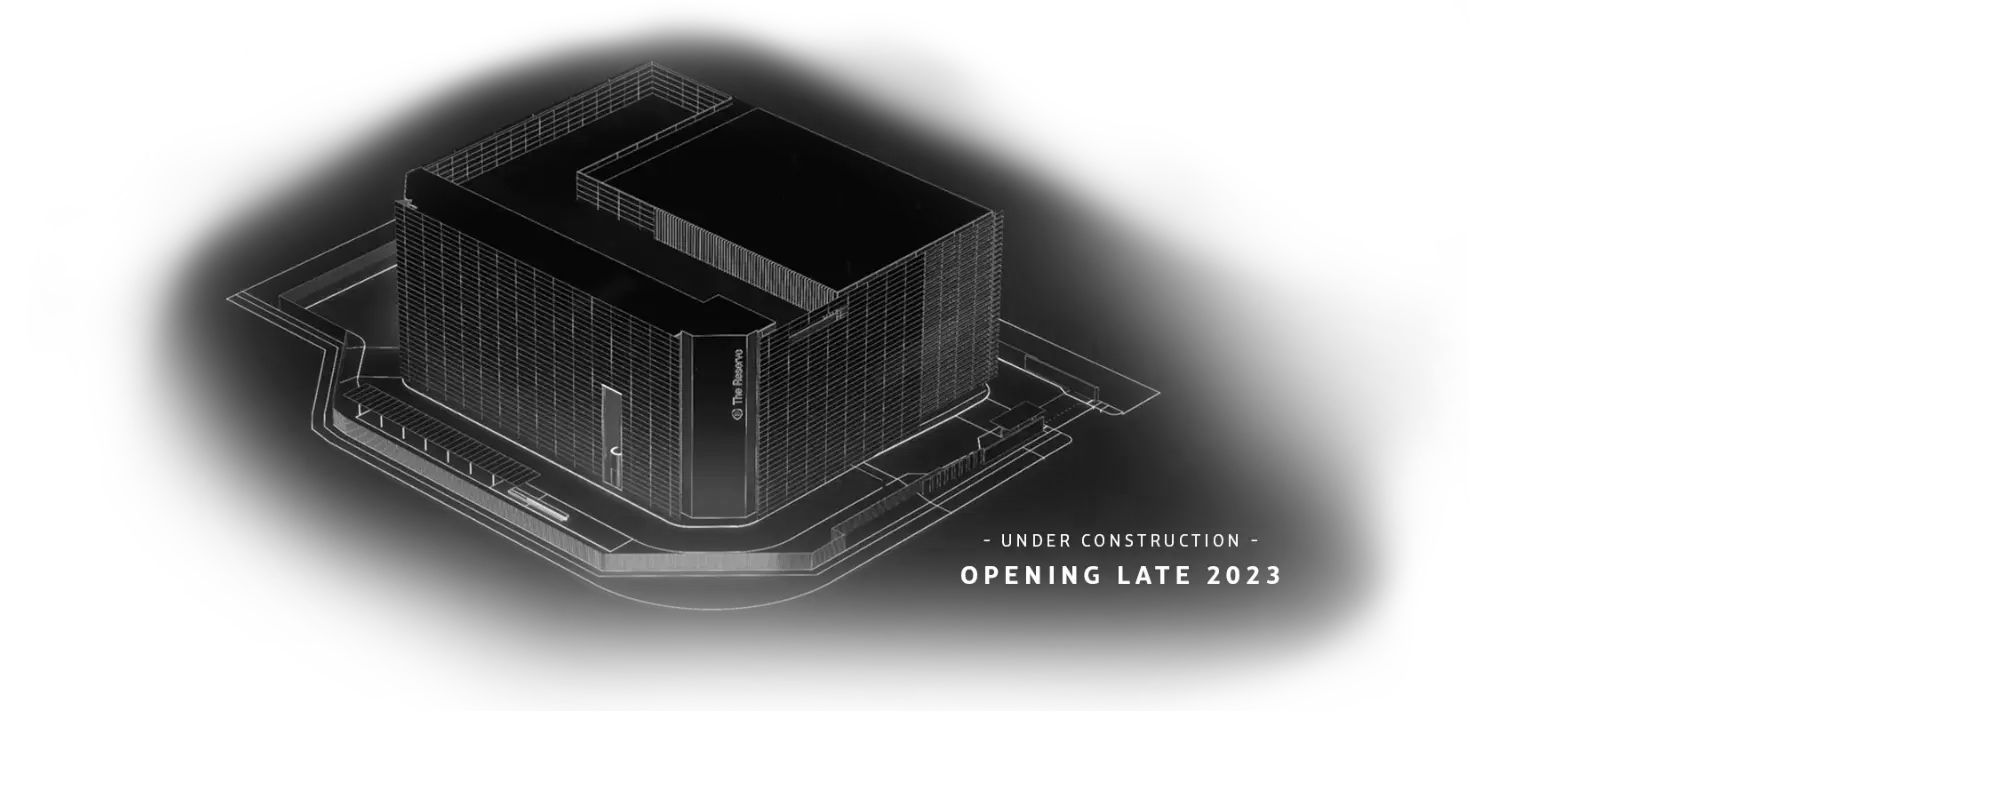 The Reserve - The worlds largest capacity bullion vault. Opening late 2023.